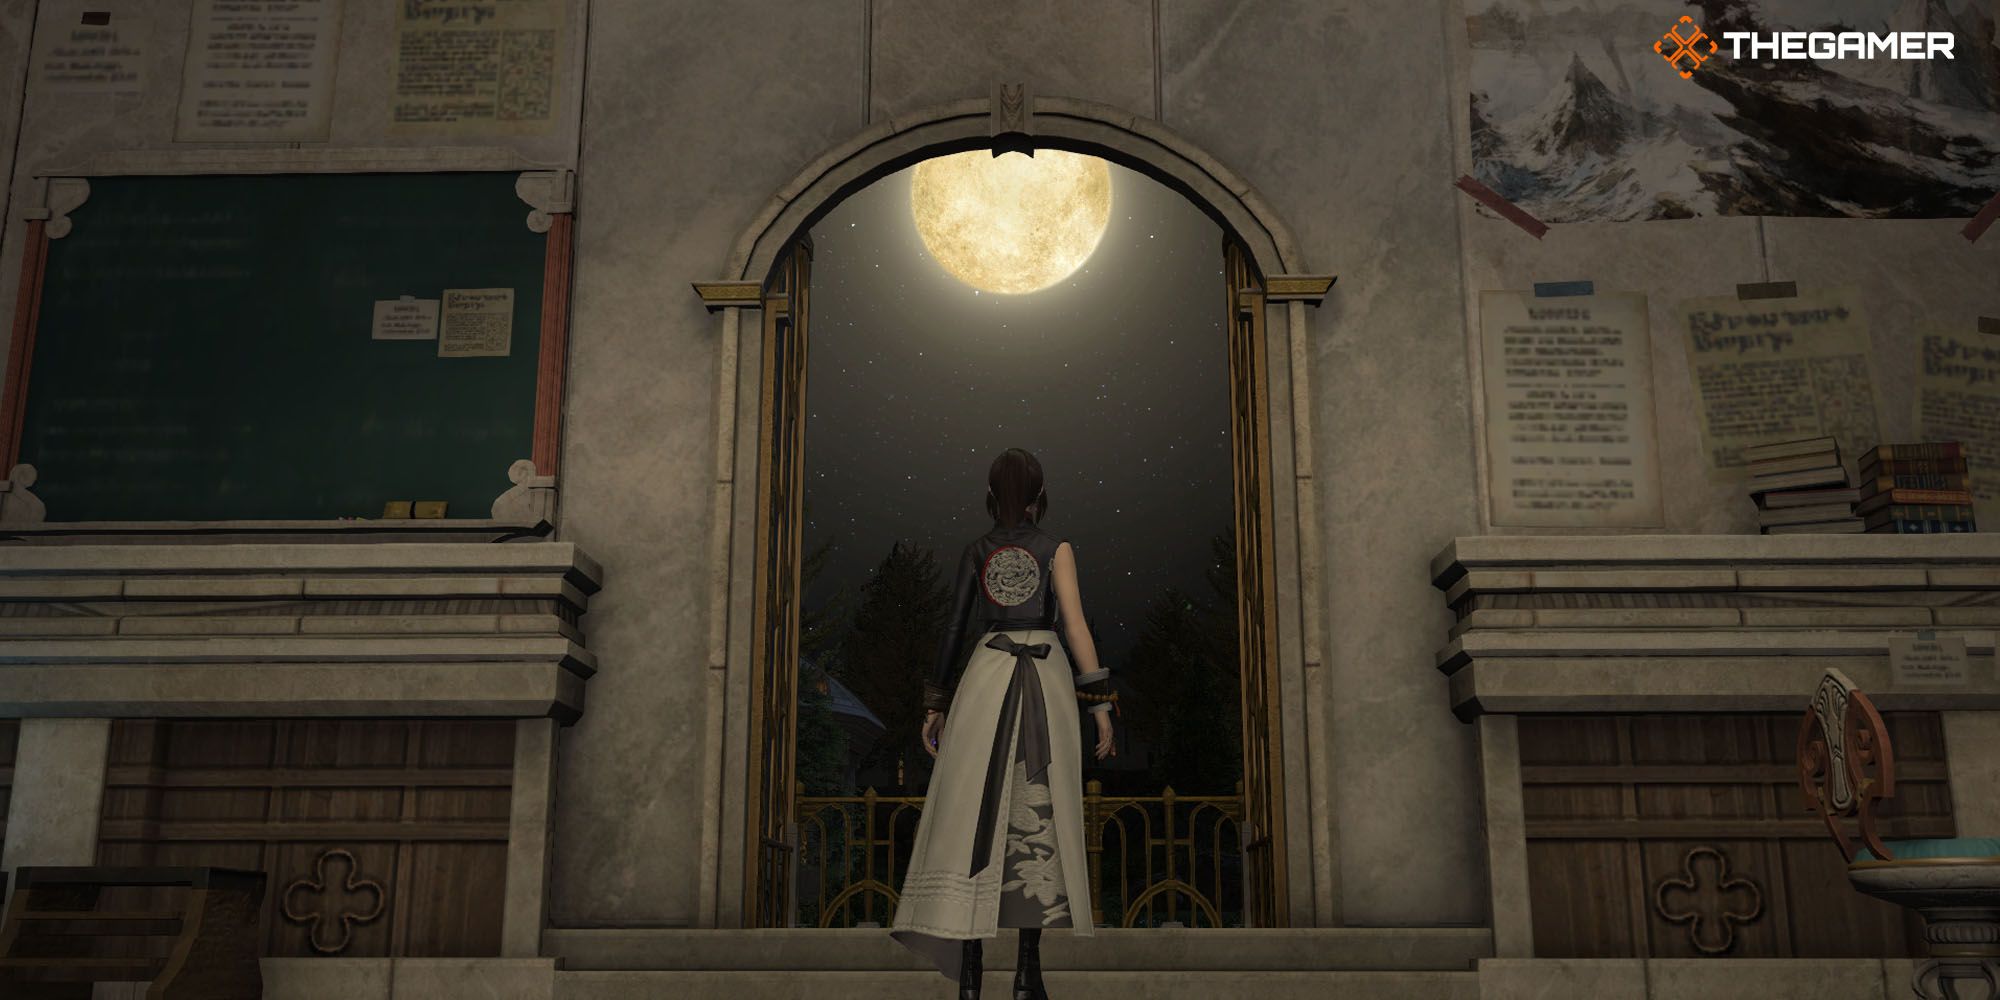 FF14 Warrior of Light looking at the moon